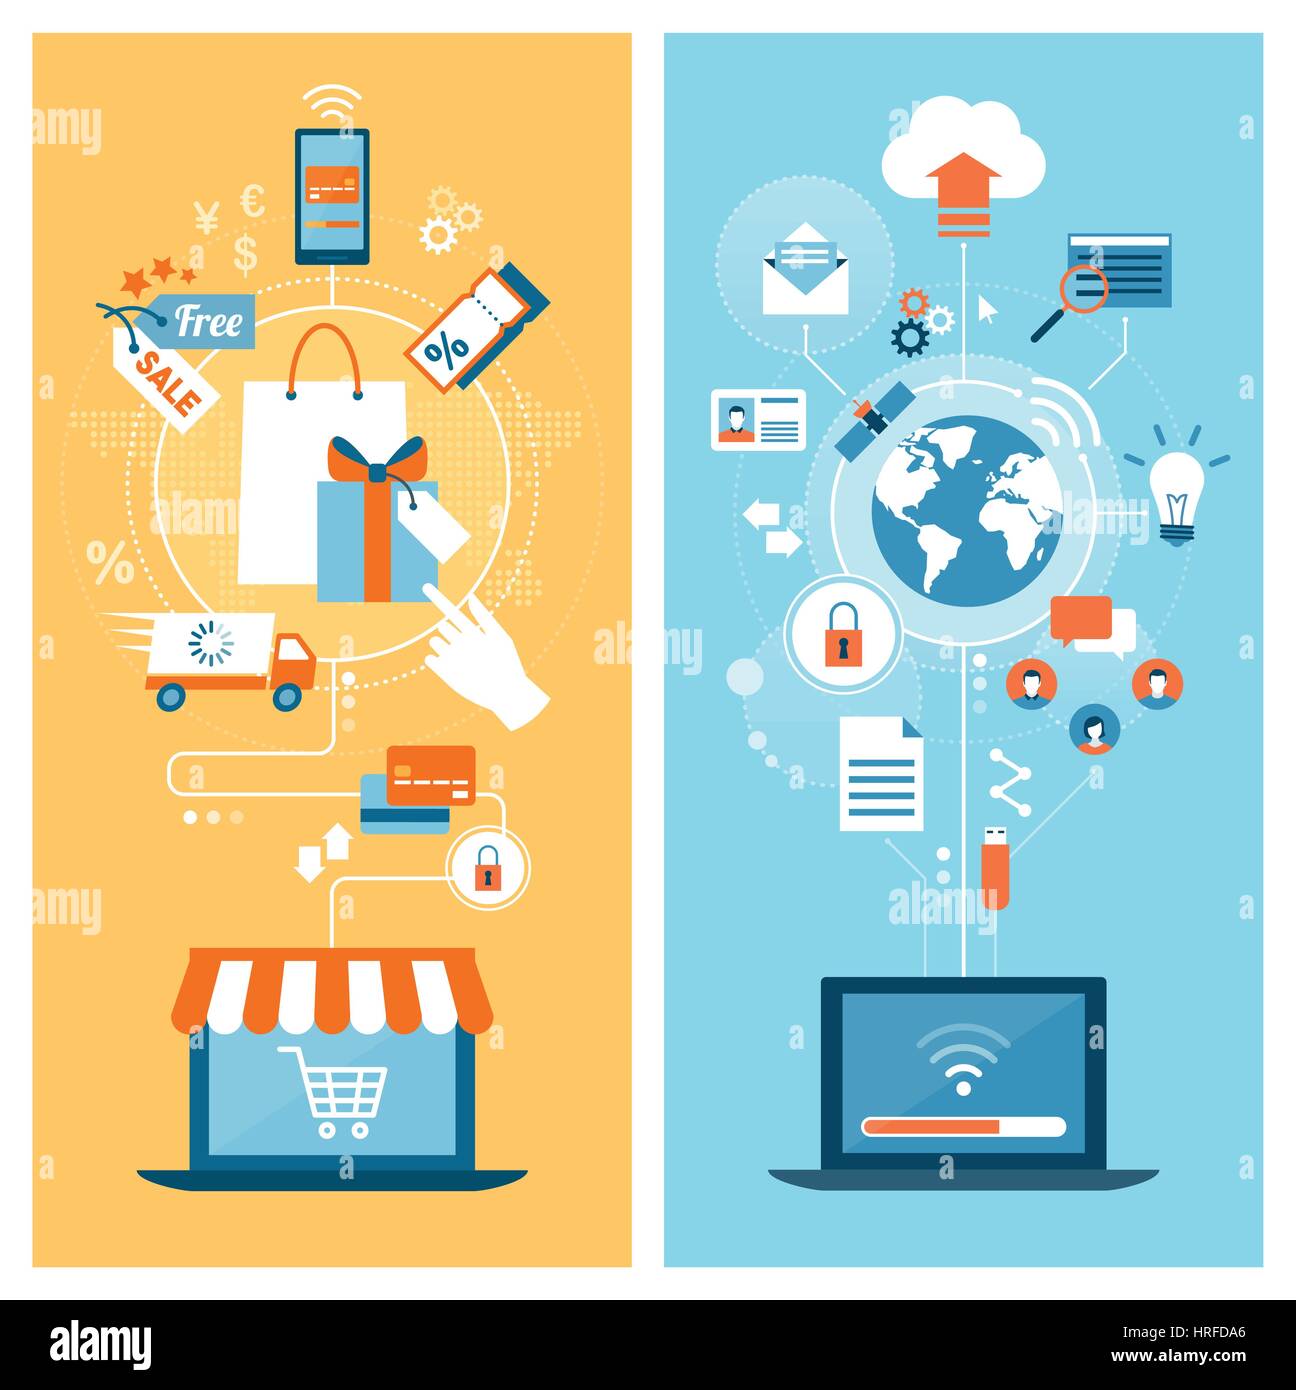 E-shopping, communication, networks and internet concepts connecting on laptops Stock Vector